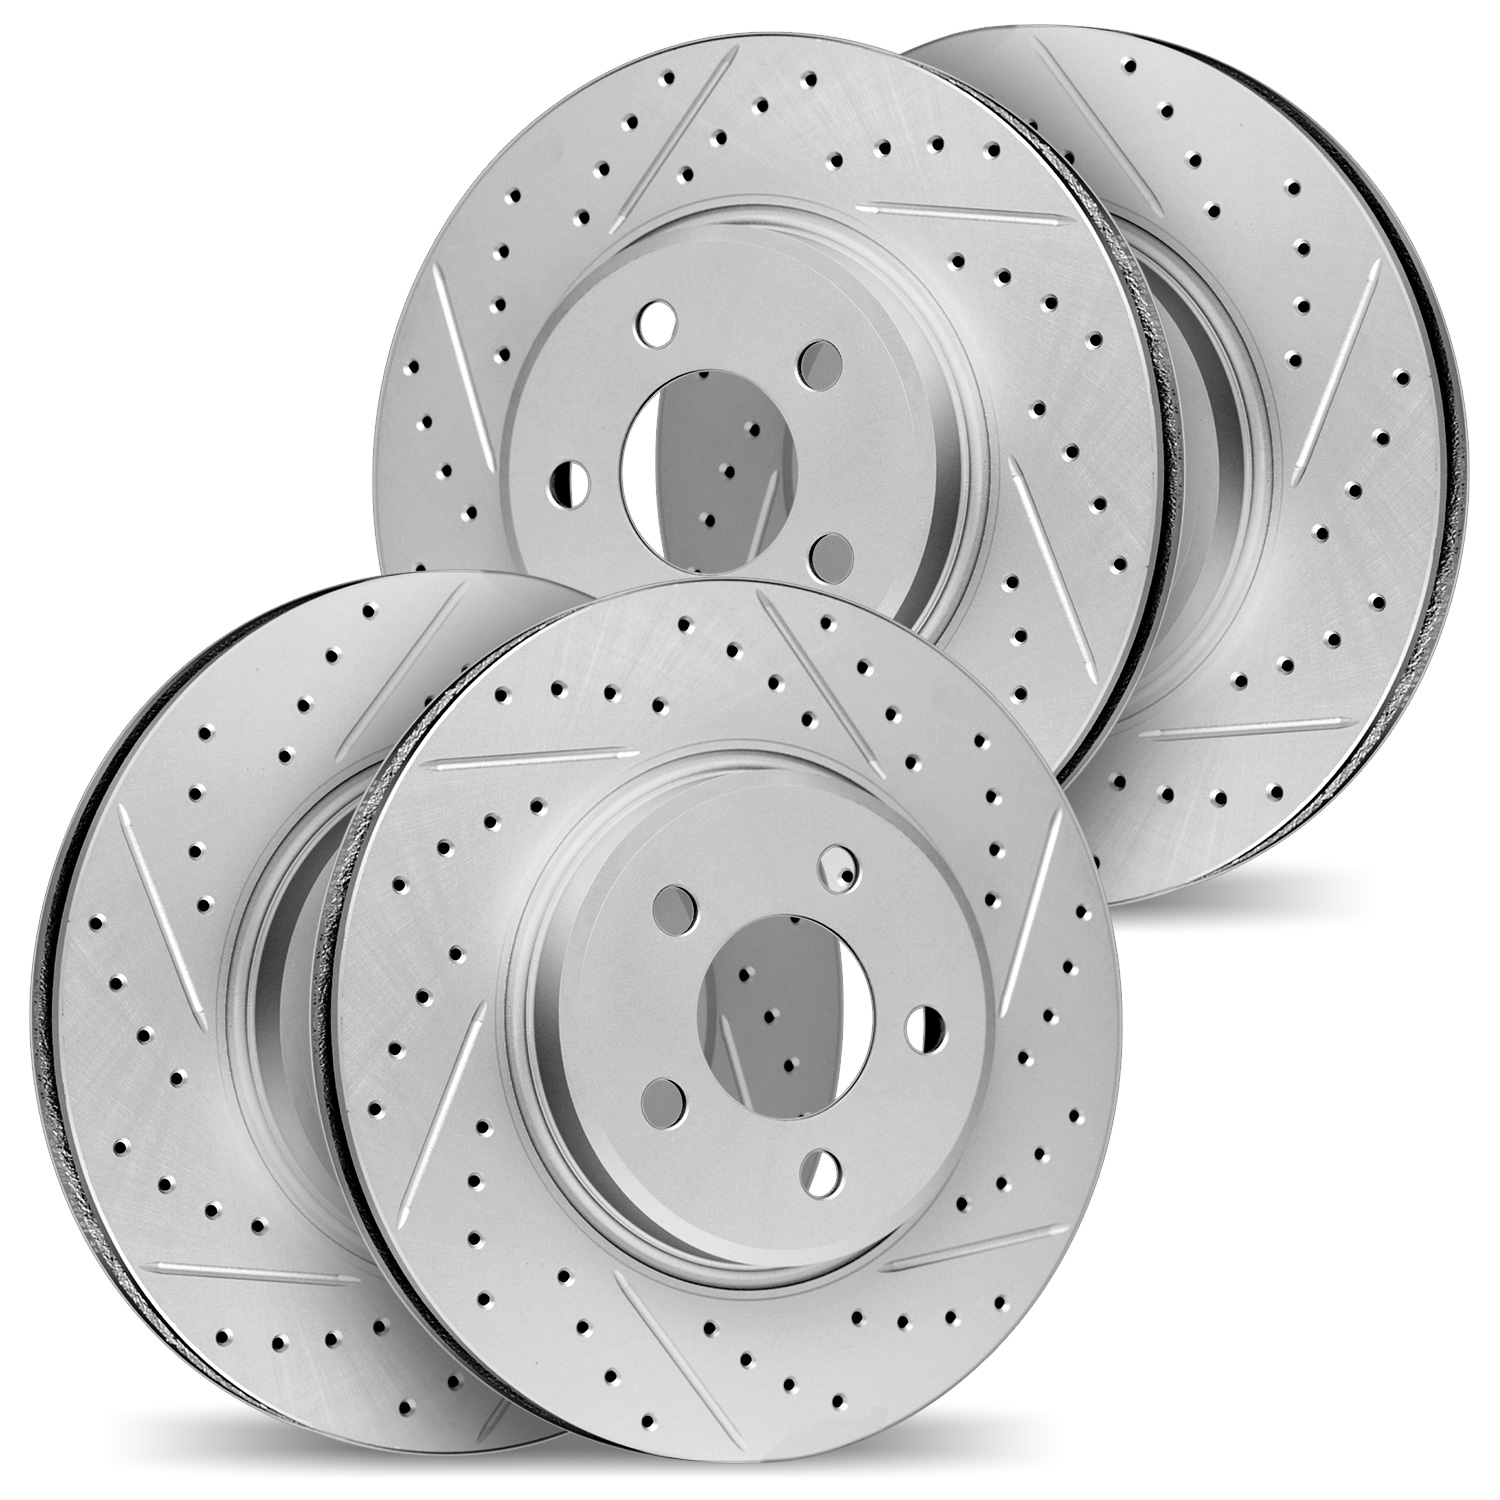 2004-21000 Geoperformance Drilled/Slotted Brake Rotors, Fits Select Kia/Hyundai/Genesis, Position: Front and Rear